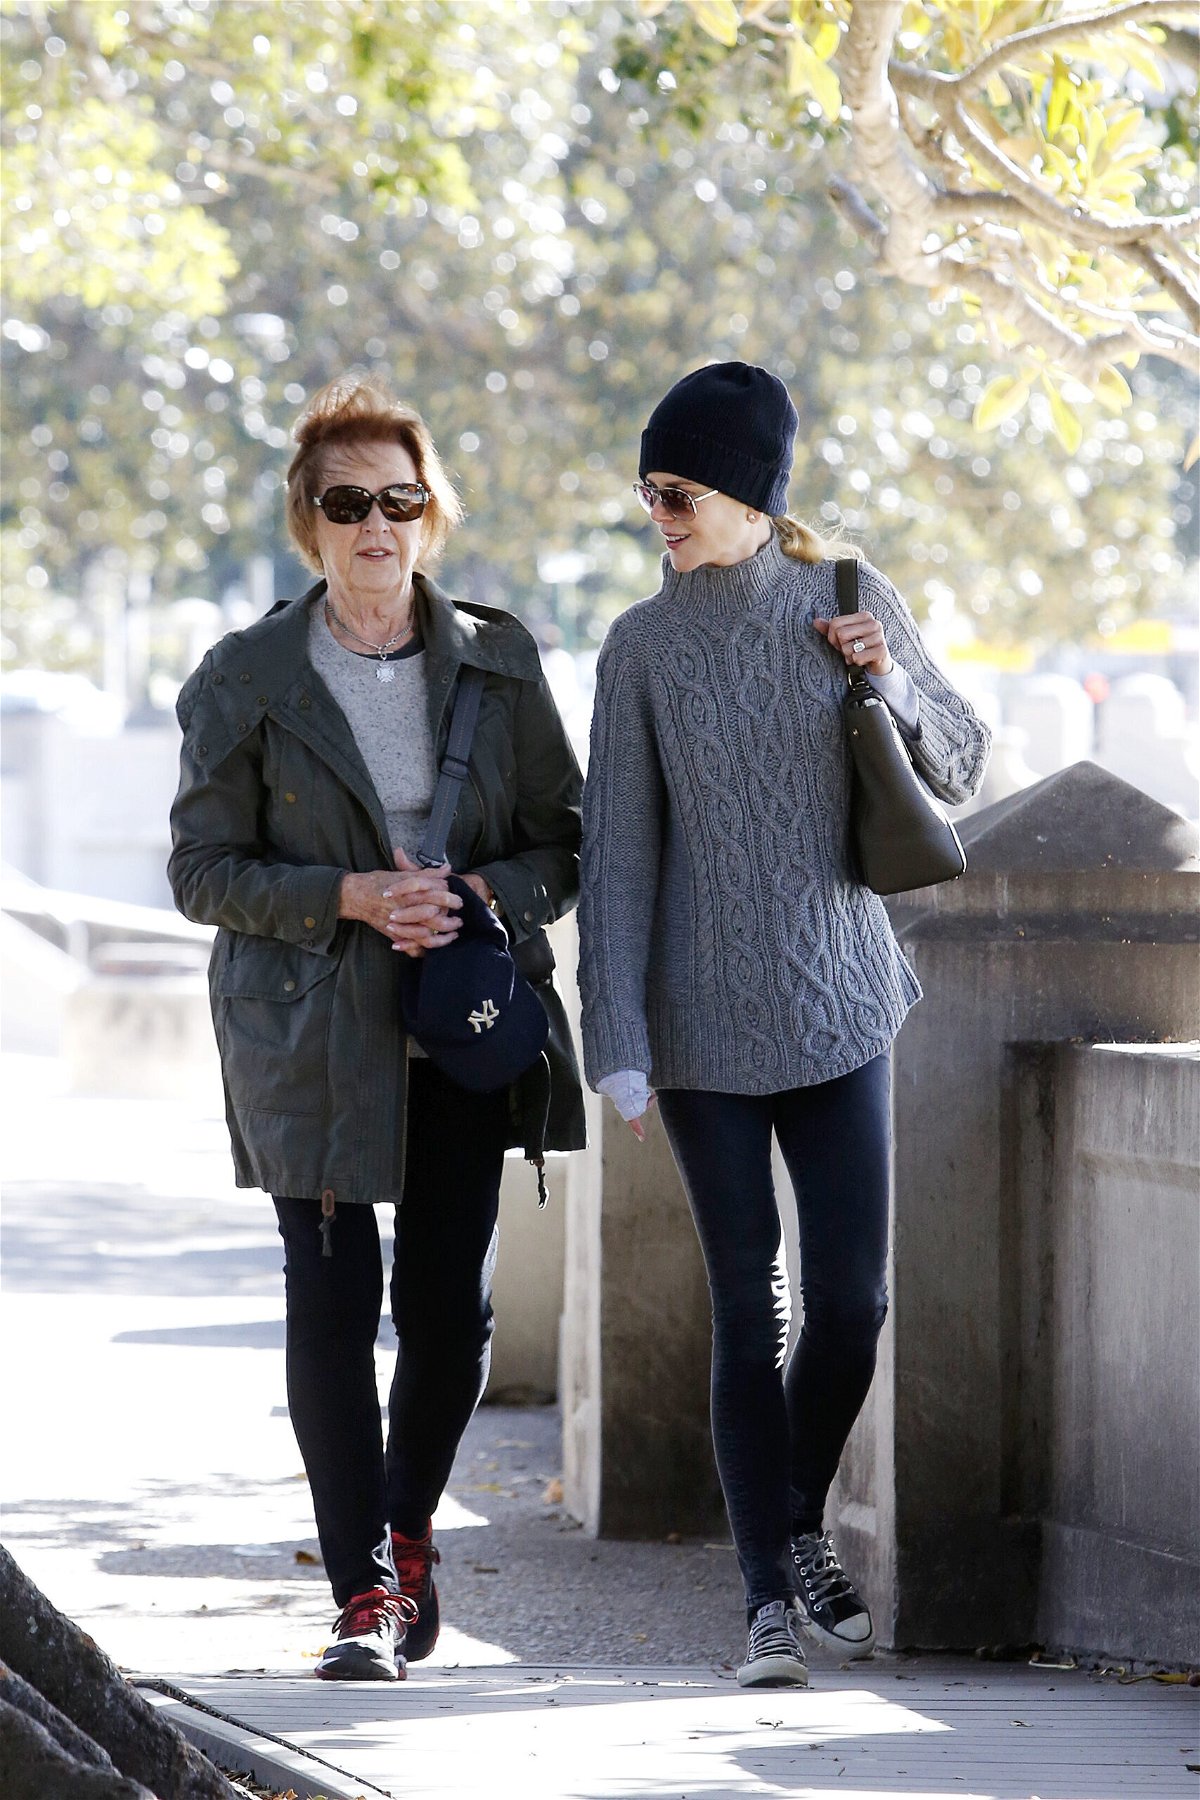 <i>Dave Swift/Newspix/Getty Images</i><br/>Actress Nicole Kidman (right) is back in Australia to care for her mother Janelle Kidman.